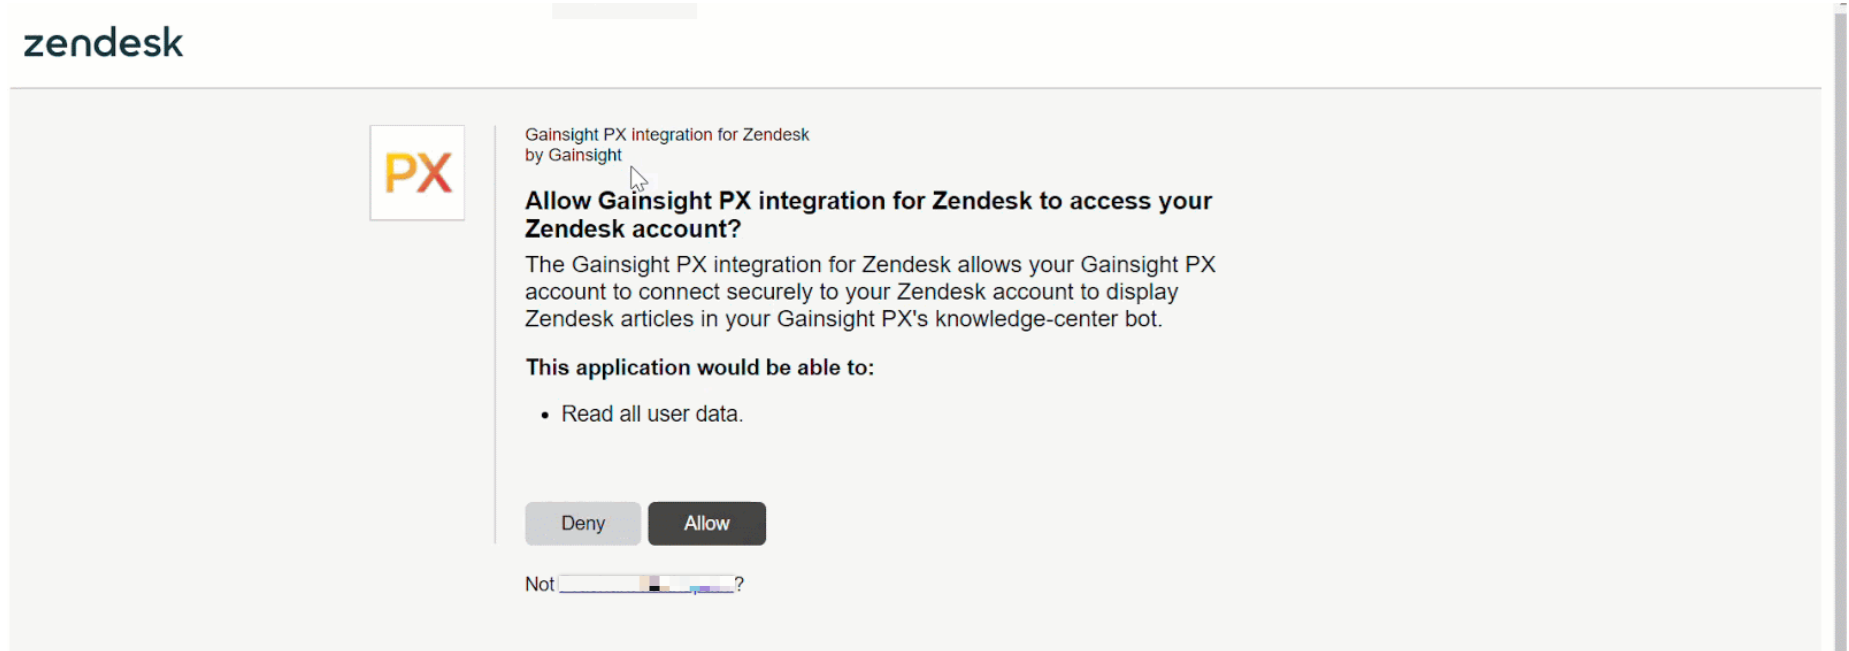 zendesk_authorize.png